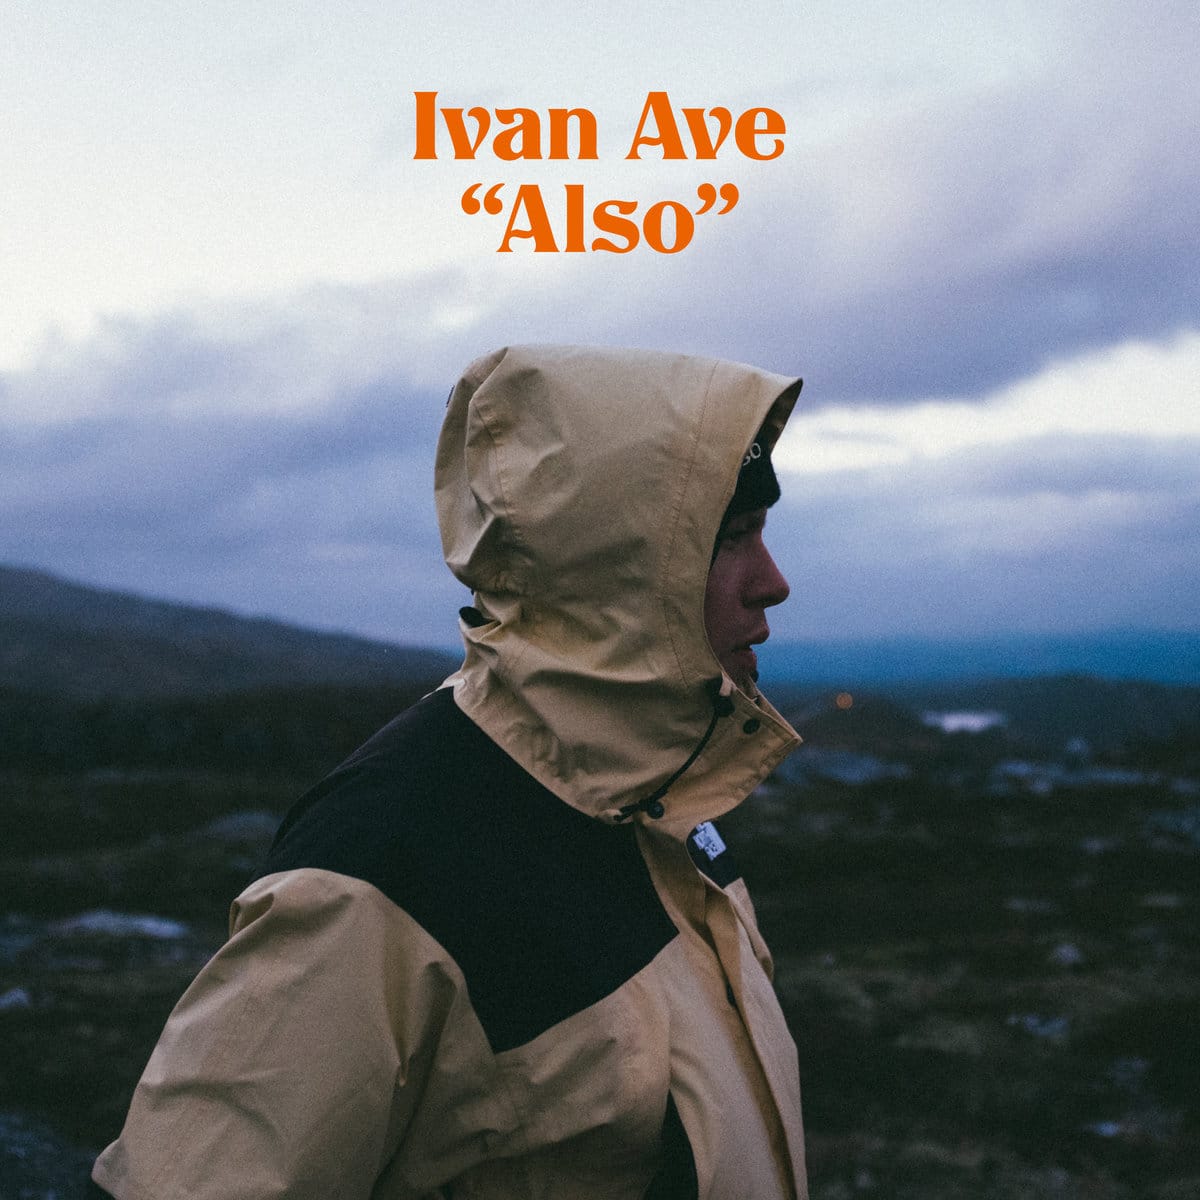 Ivan Ave - "Also" (co-produced by Kaytranada & Kiefer) (Video)